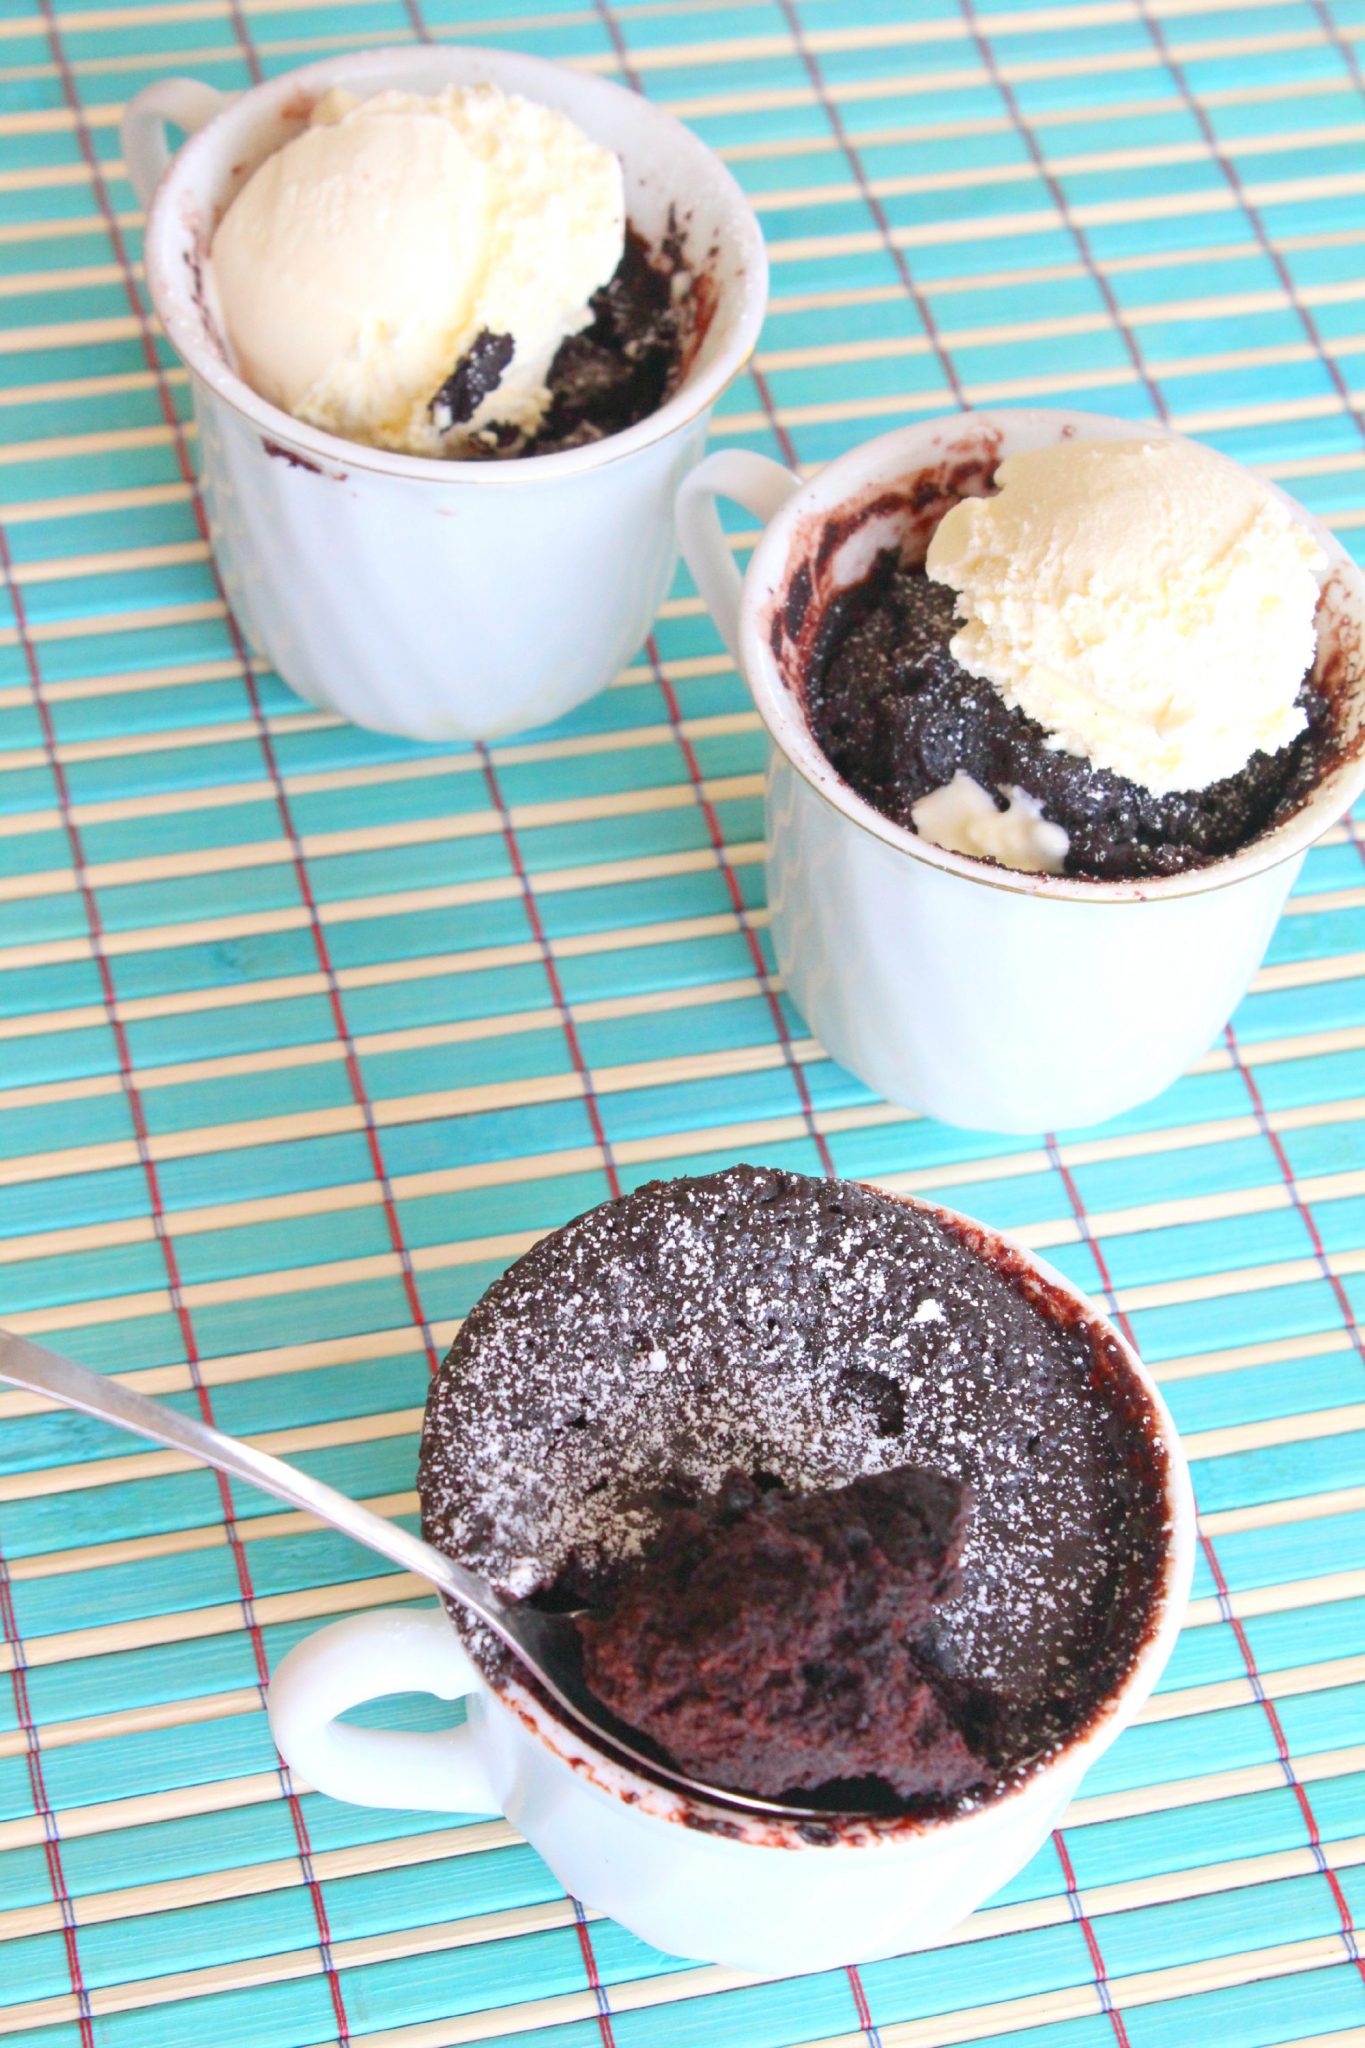 Microwave Brownie Recipe Made In A Cup